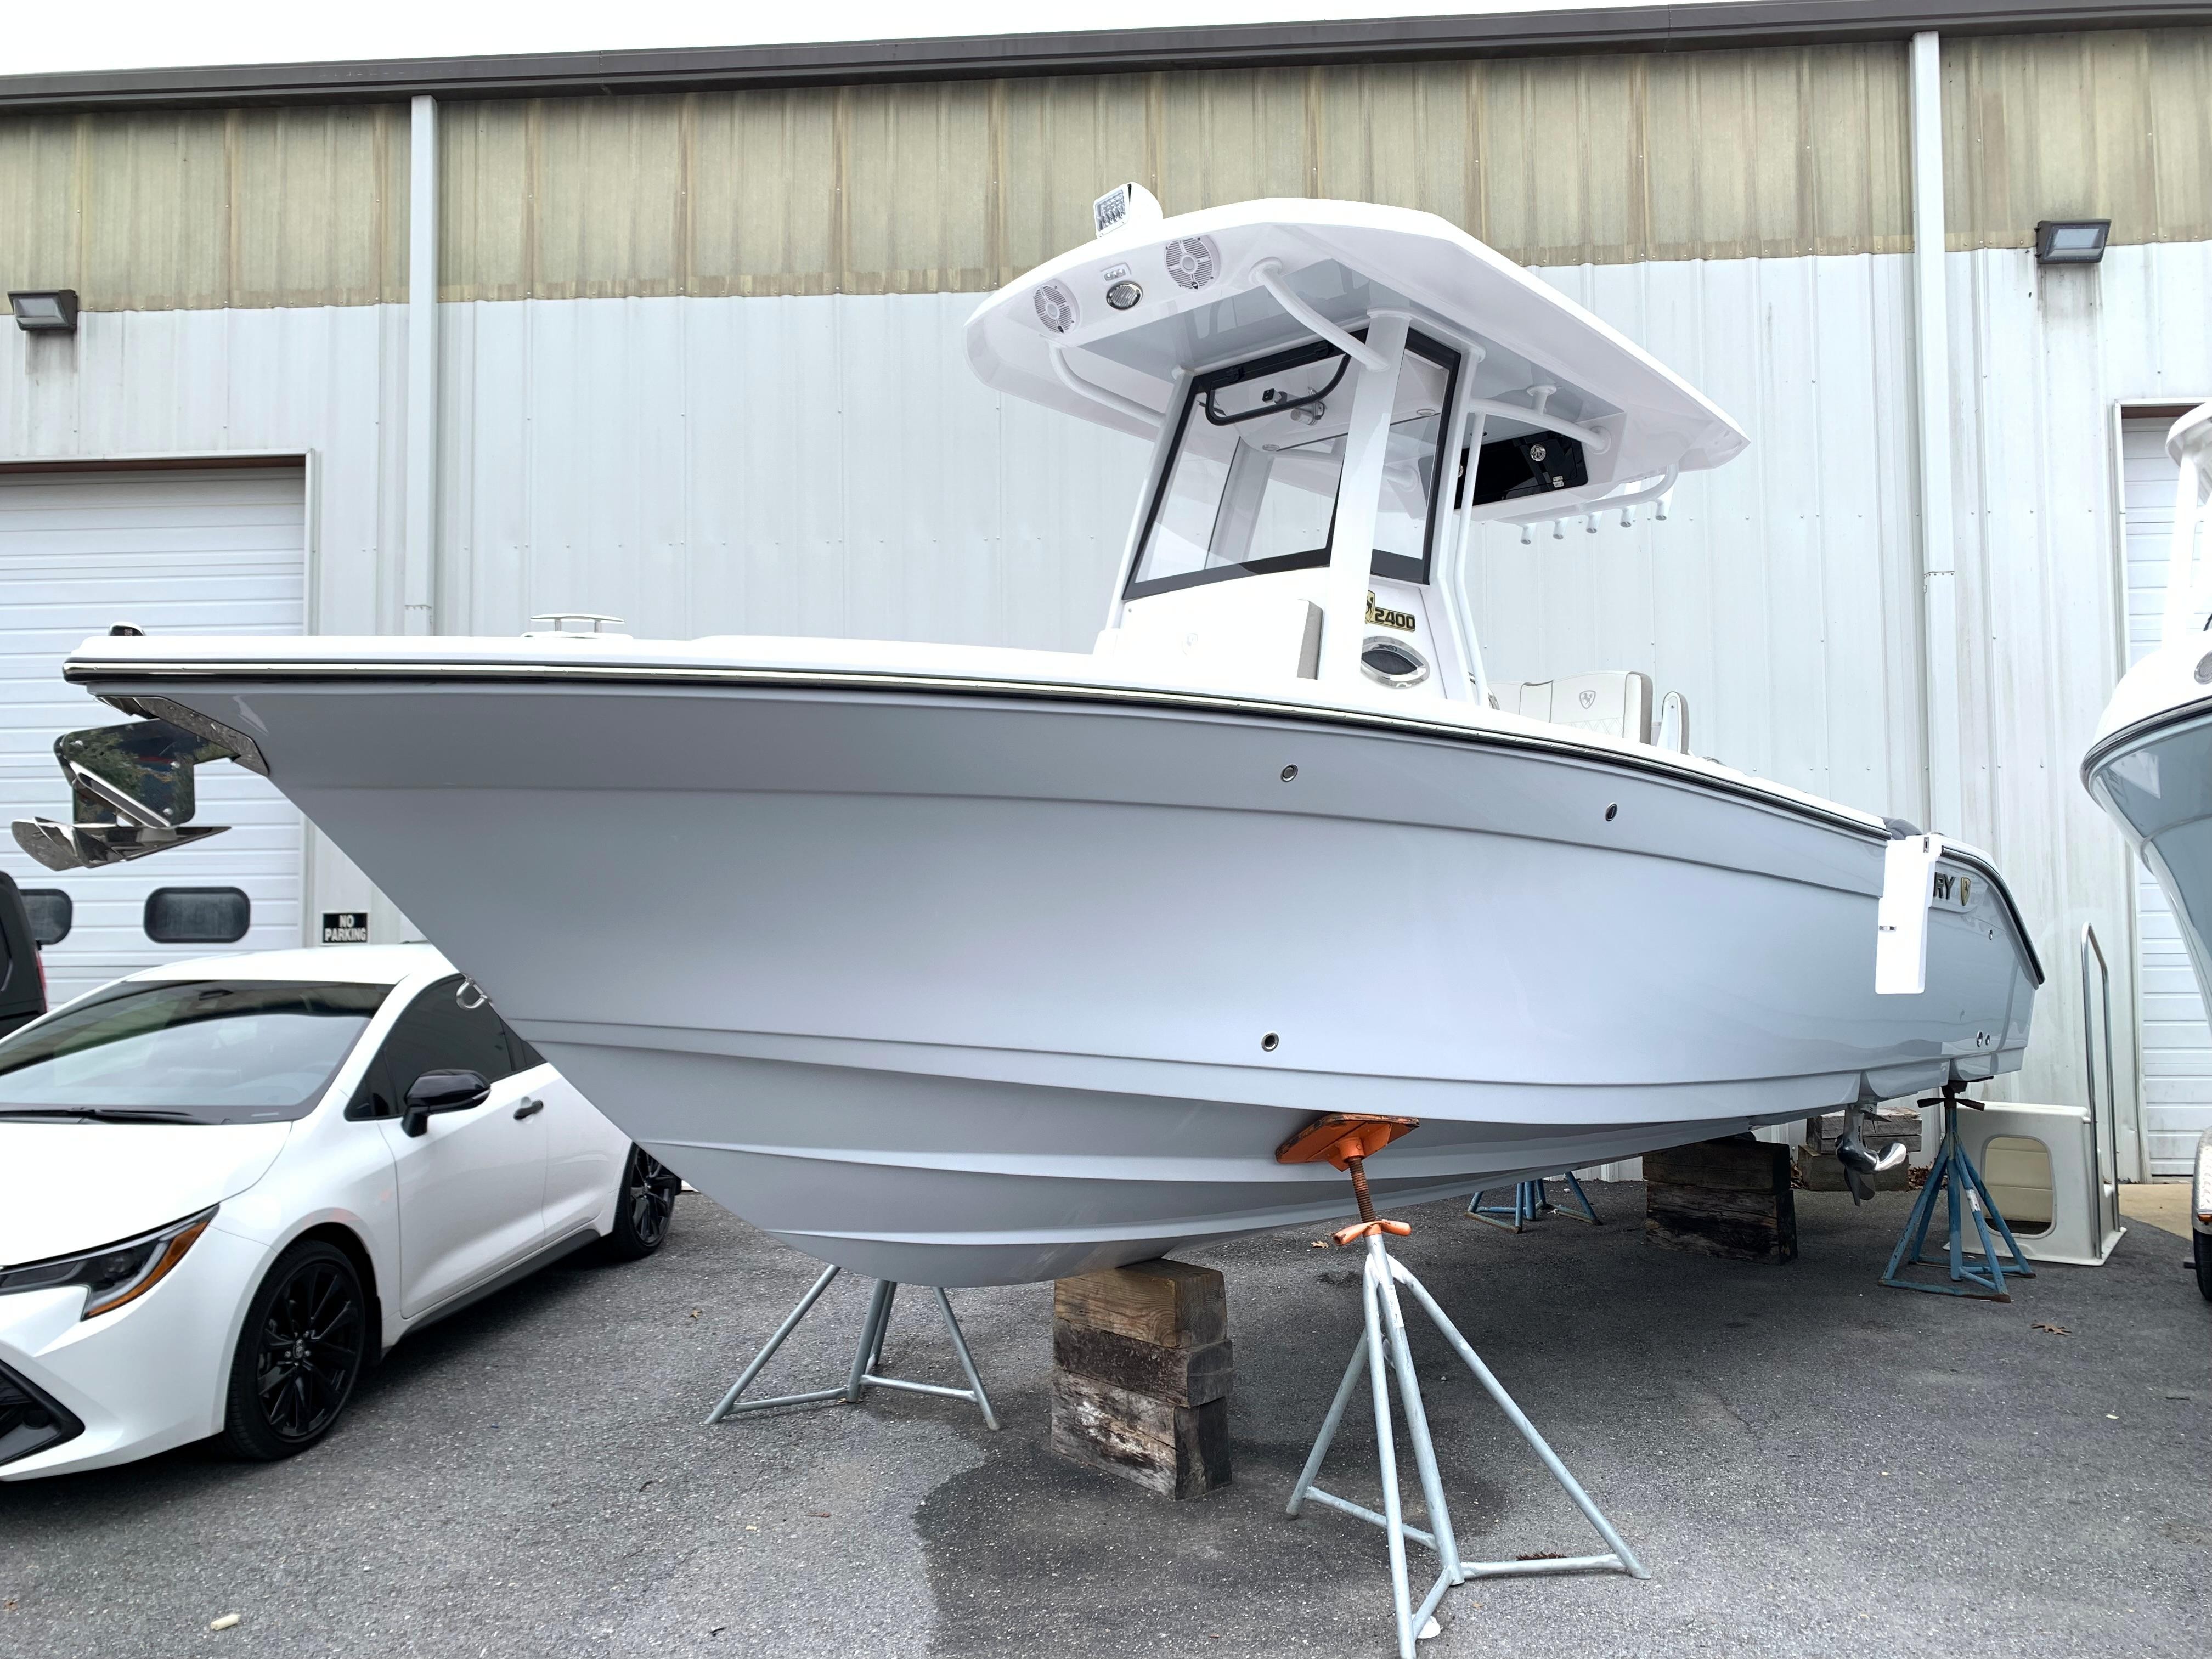 New Power Center Console for Sale 2022 2400 CC Boat Highlights